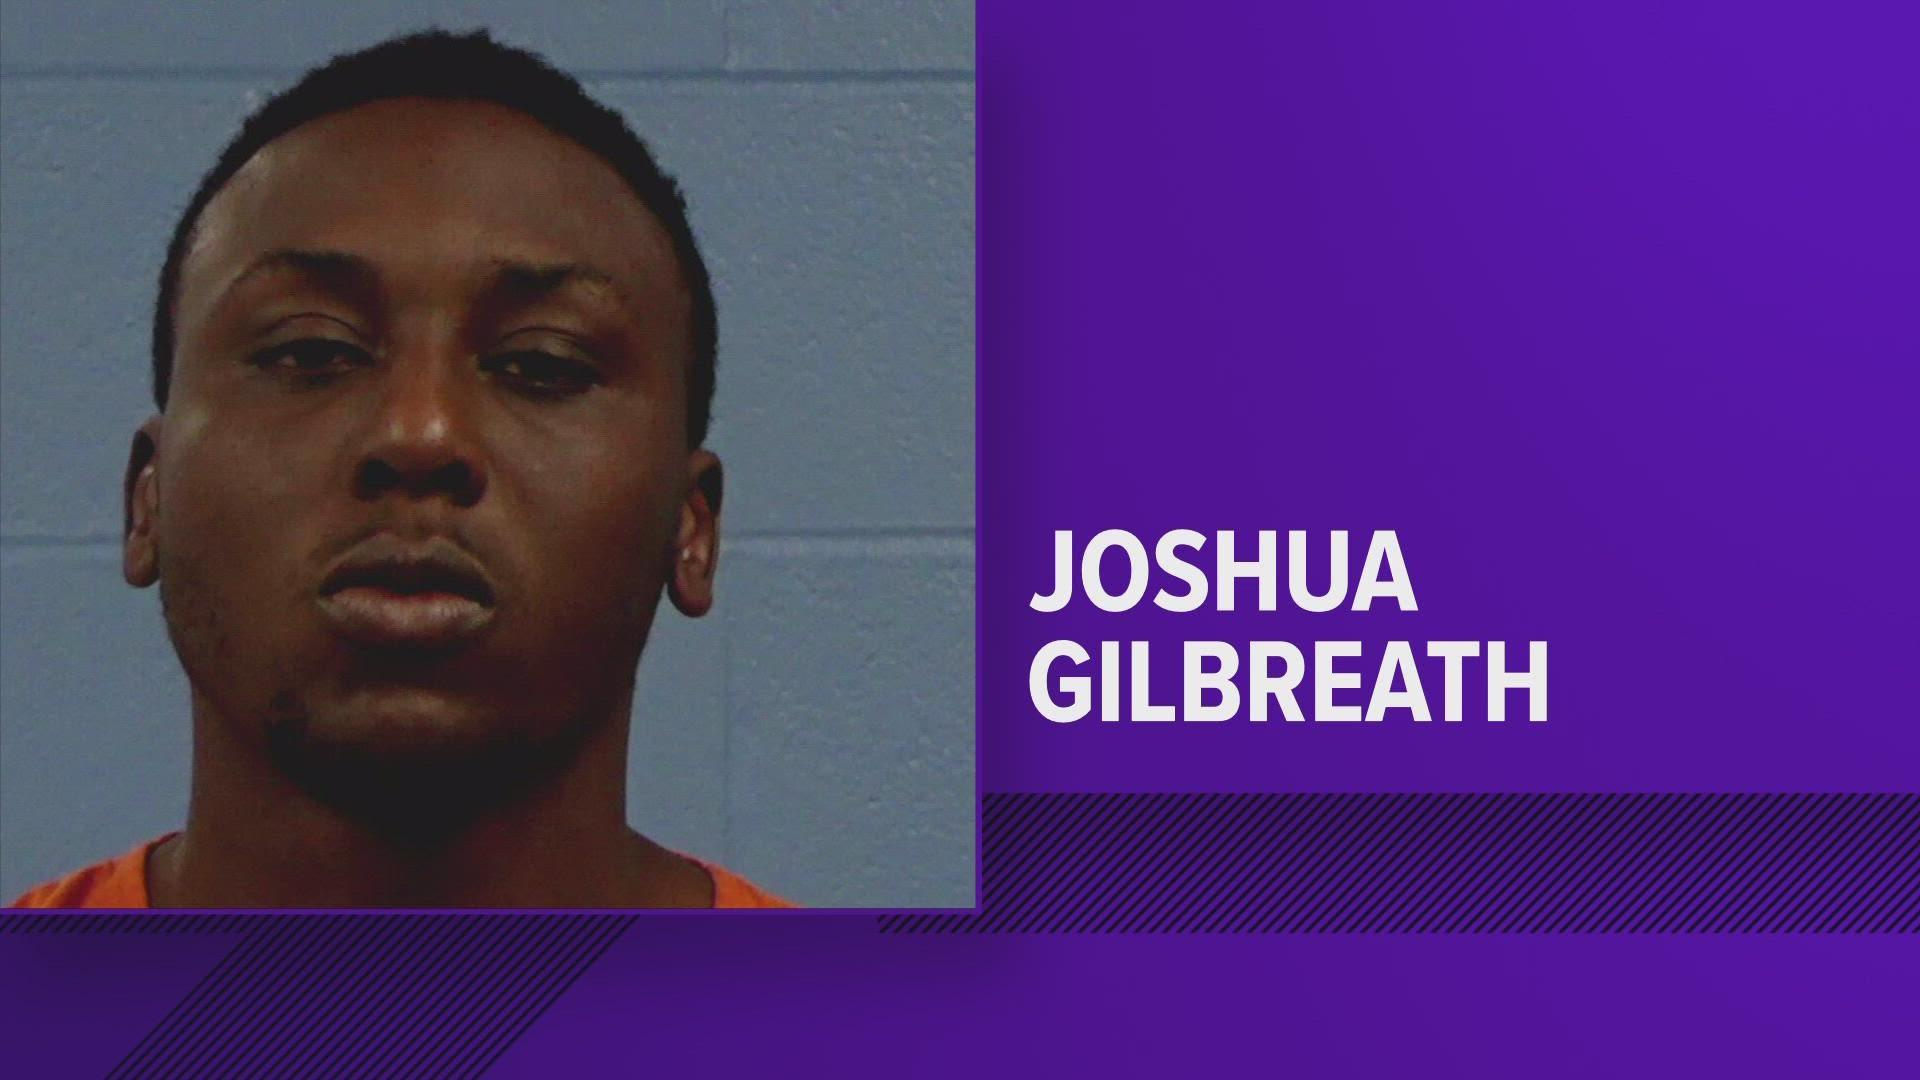 On Aug. 13, authorities arrested Joshua Anthony Gilbreath from Pflugerville in connection with the death.